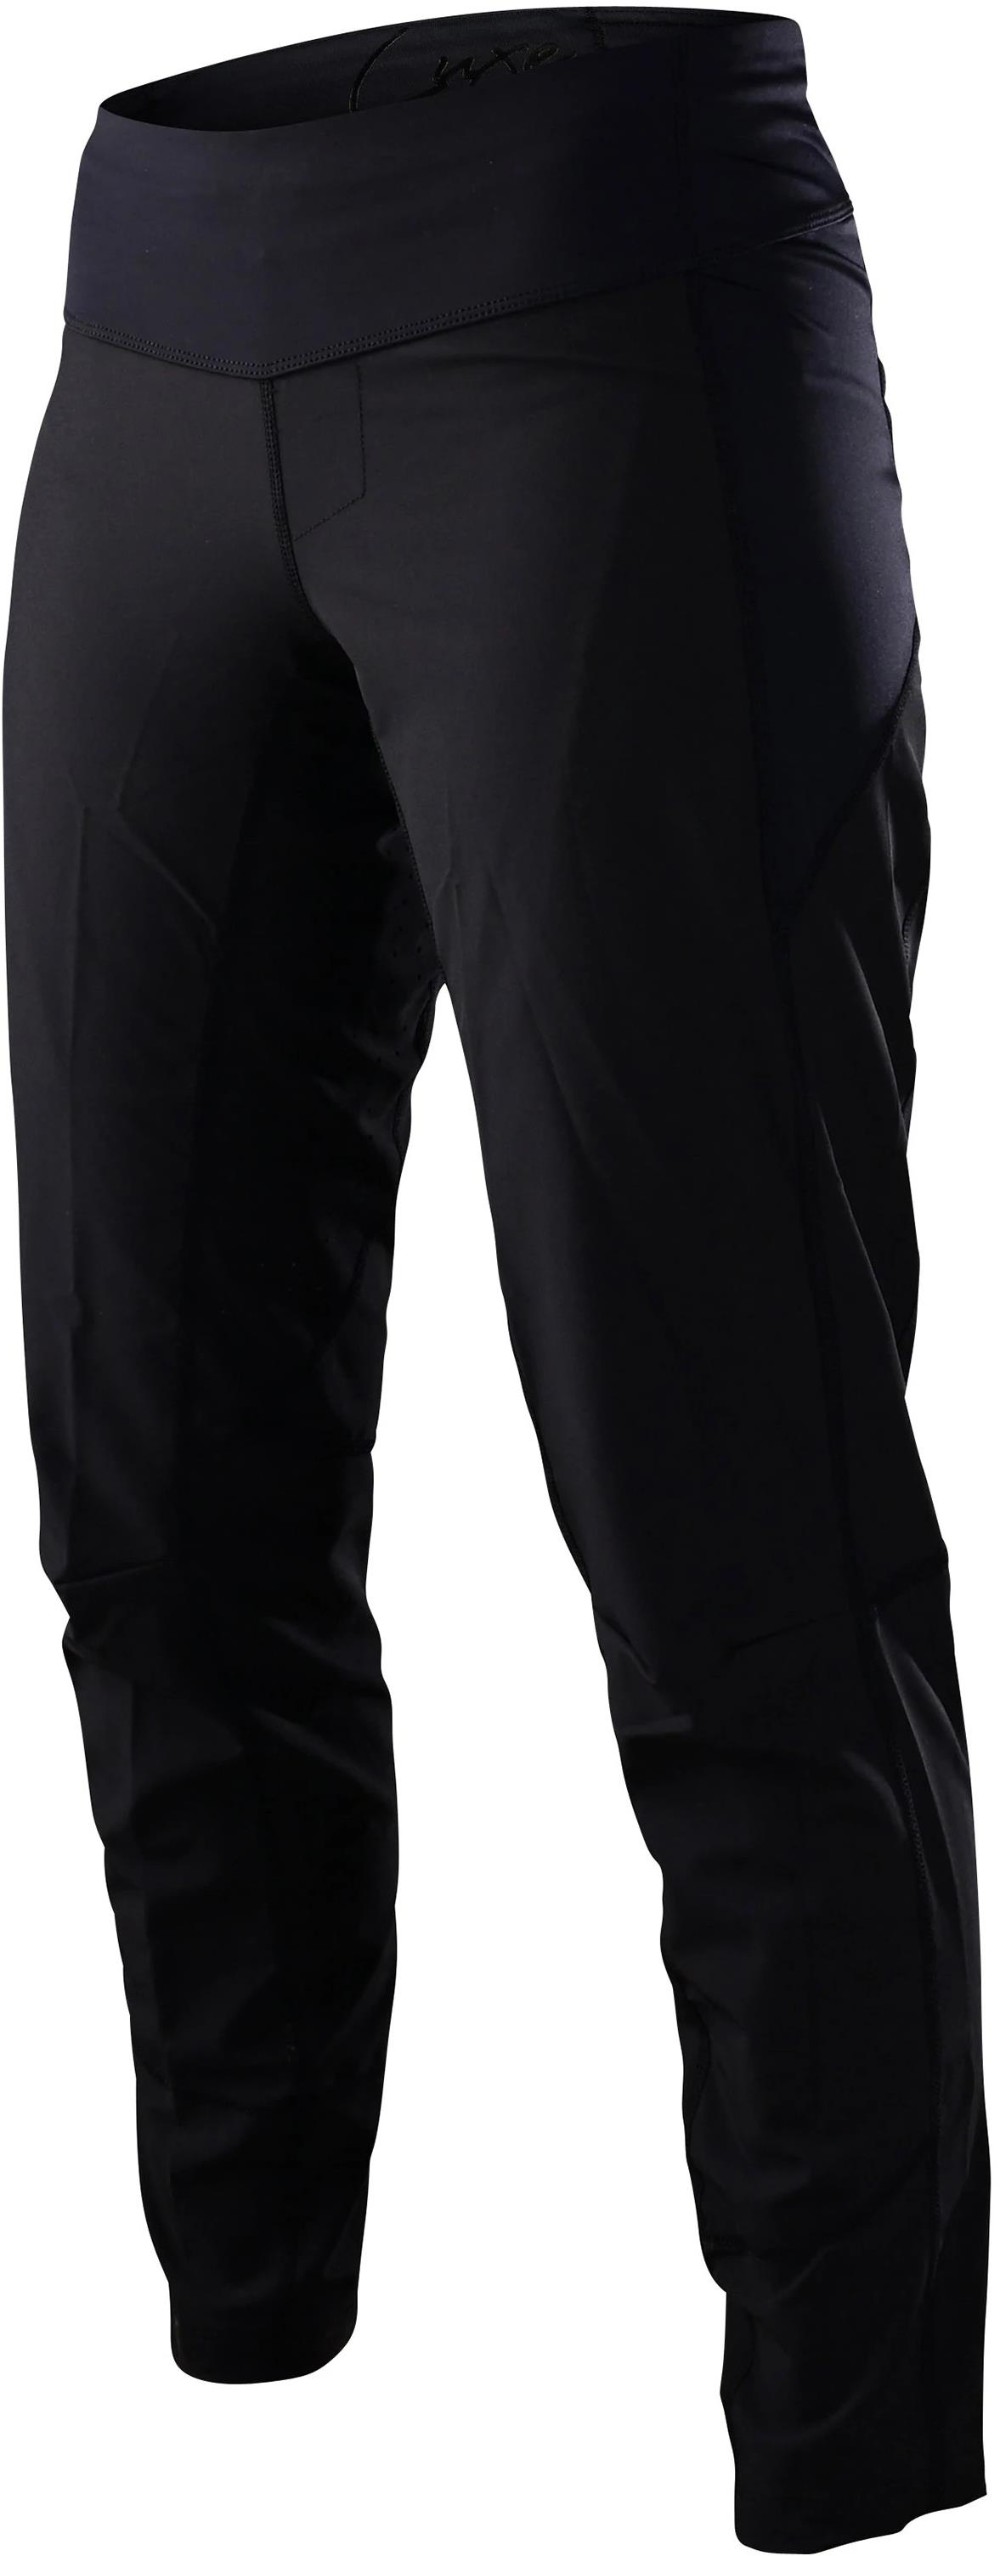 Luxe Womens MTB Cycling Trousers image 0